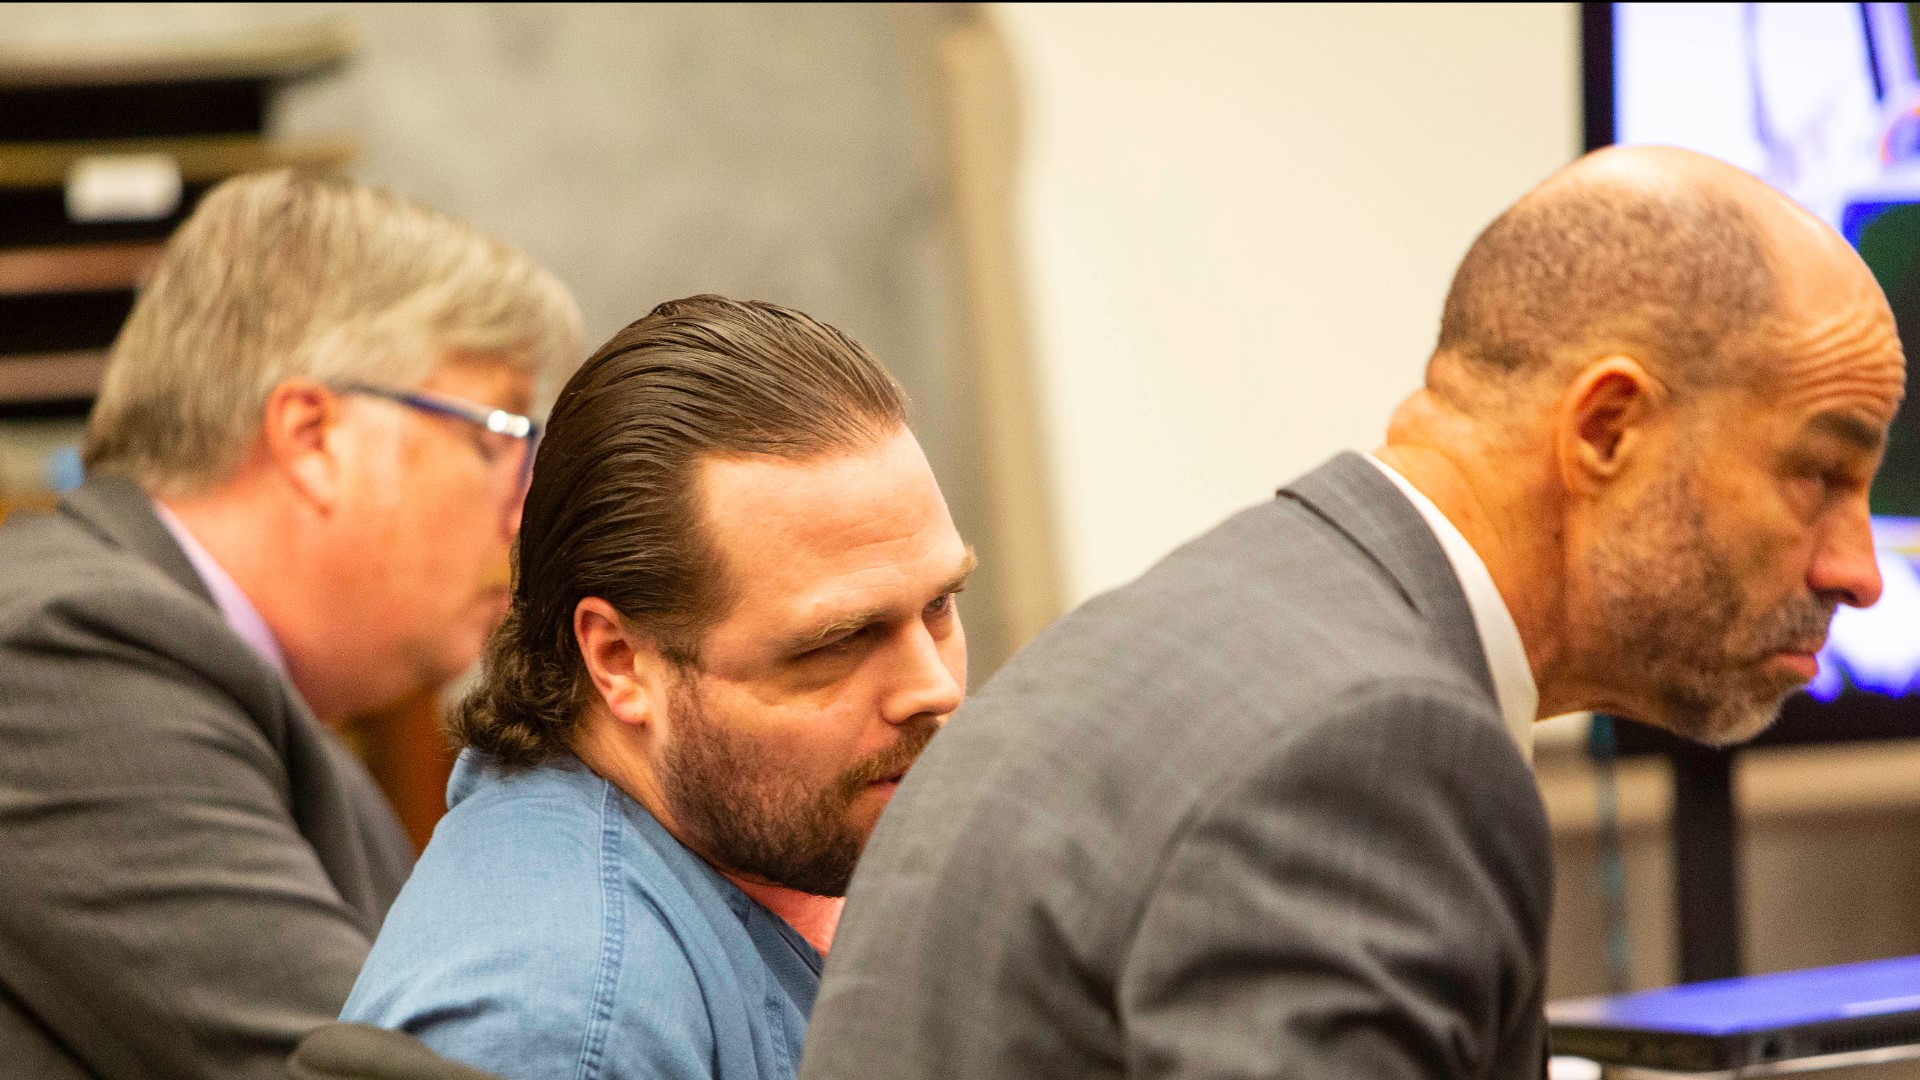 On Monday, lawyers for Jeremy Christian began to present their defense. The lawyers said they plan to call experts to talk about Christian's mental health.